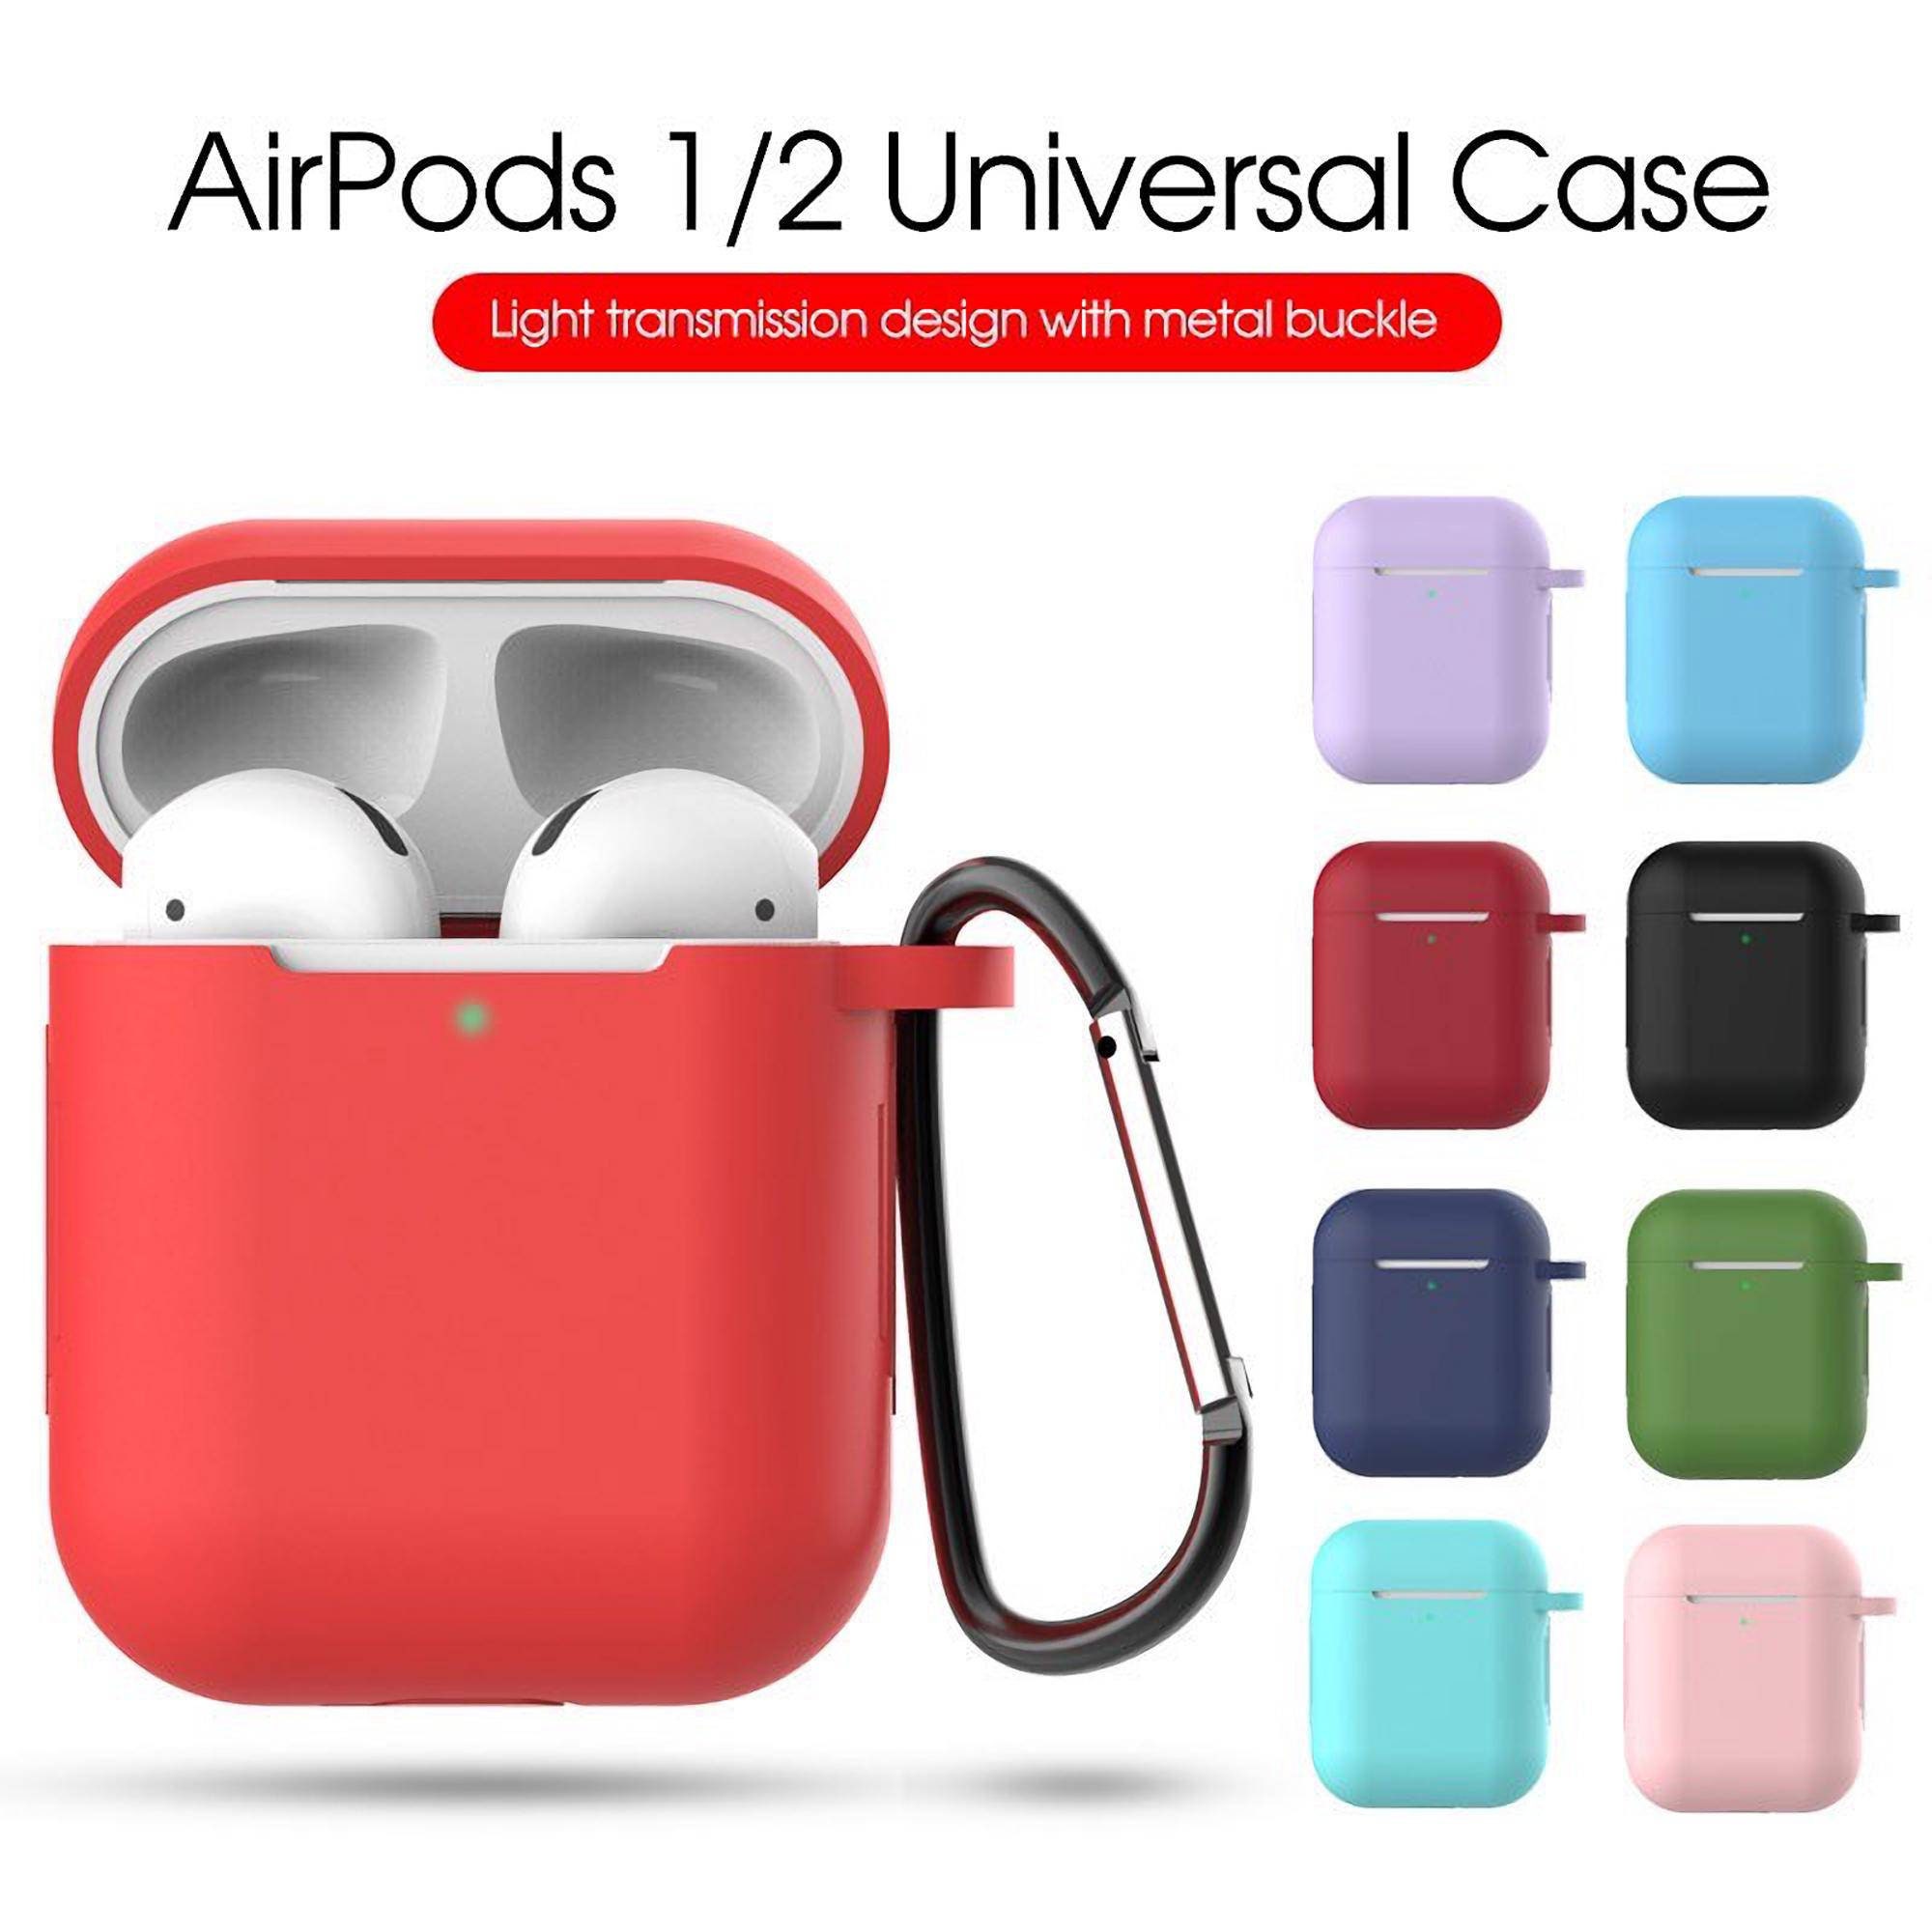 R-fun AirPods Case Cover, Soft Silicone Protective Cover with Keychain for  Women Men Compatible with…See more R-fun AirPods Case Cover, Soft Silicone